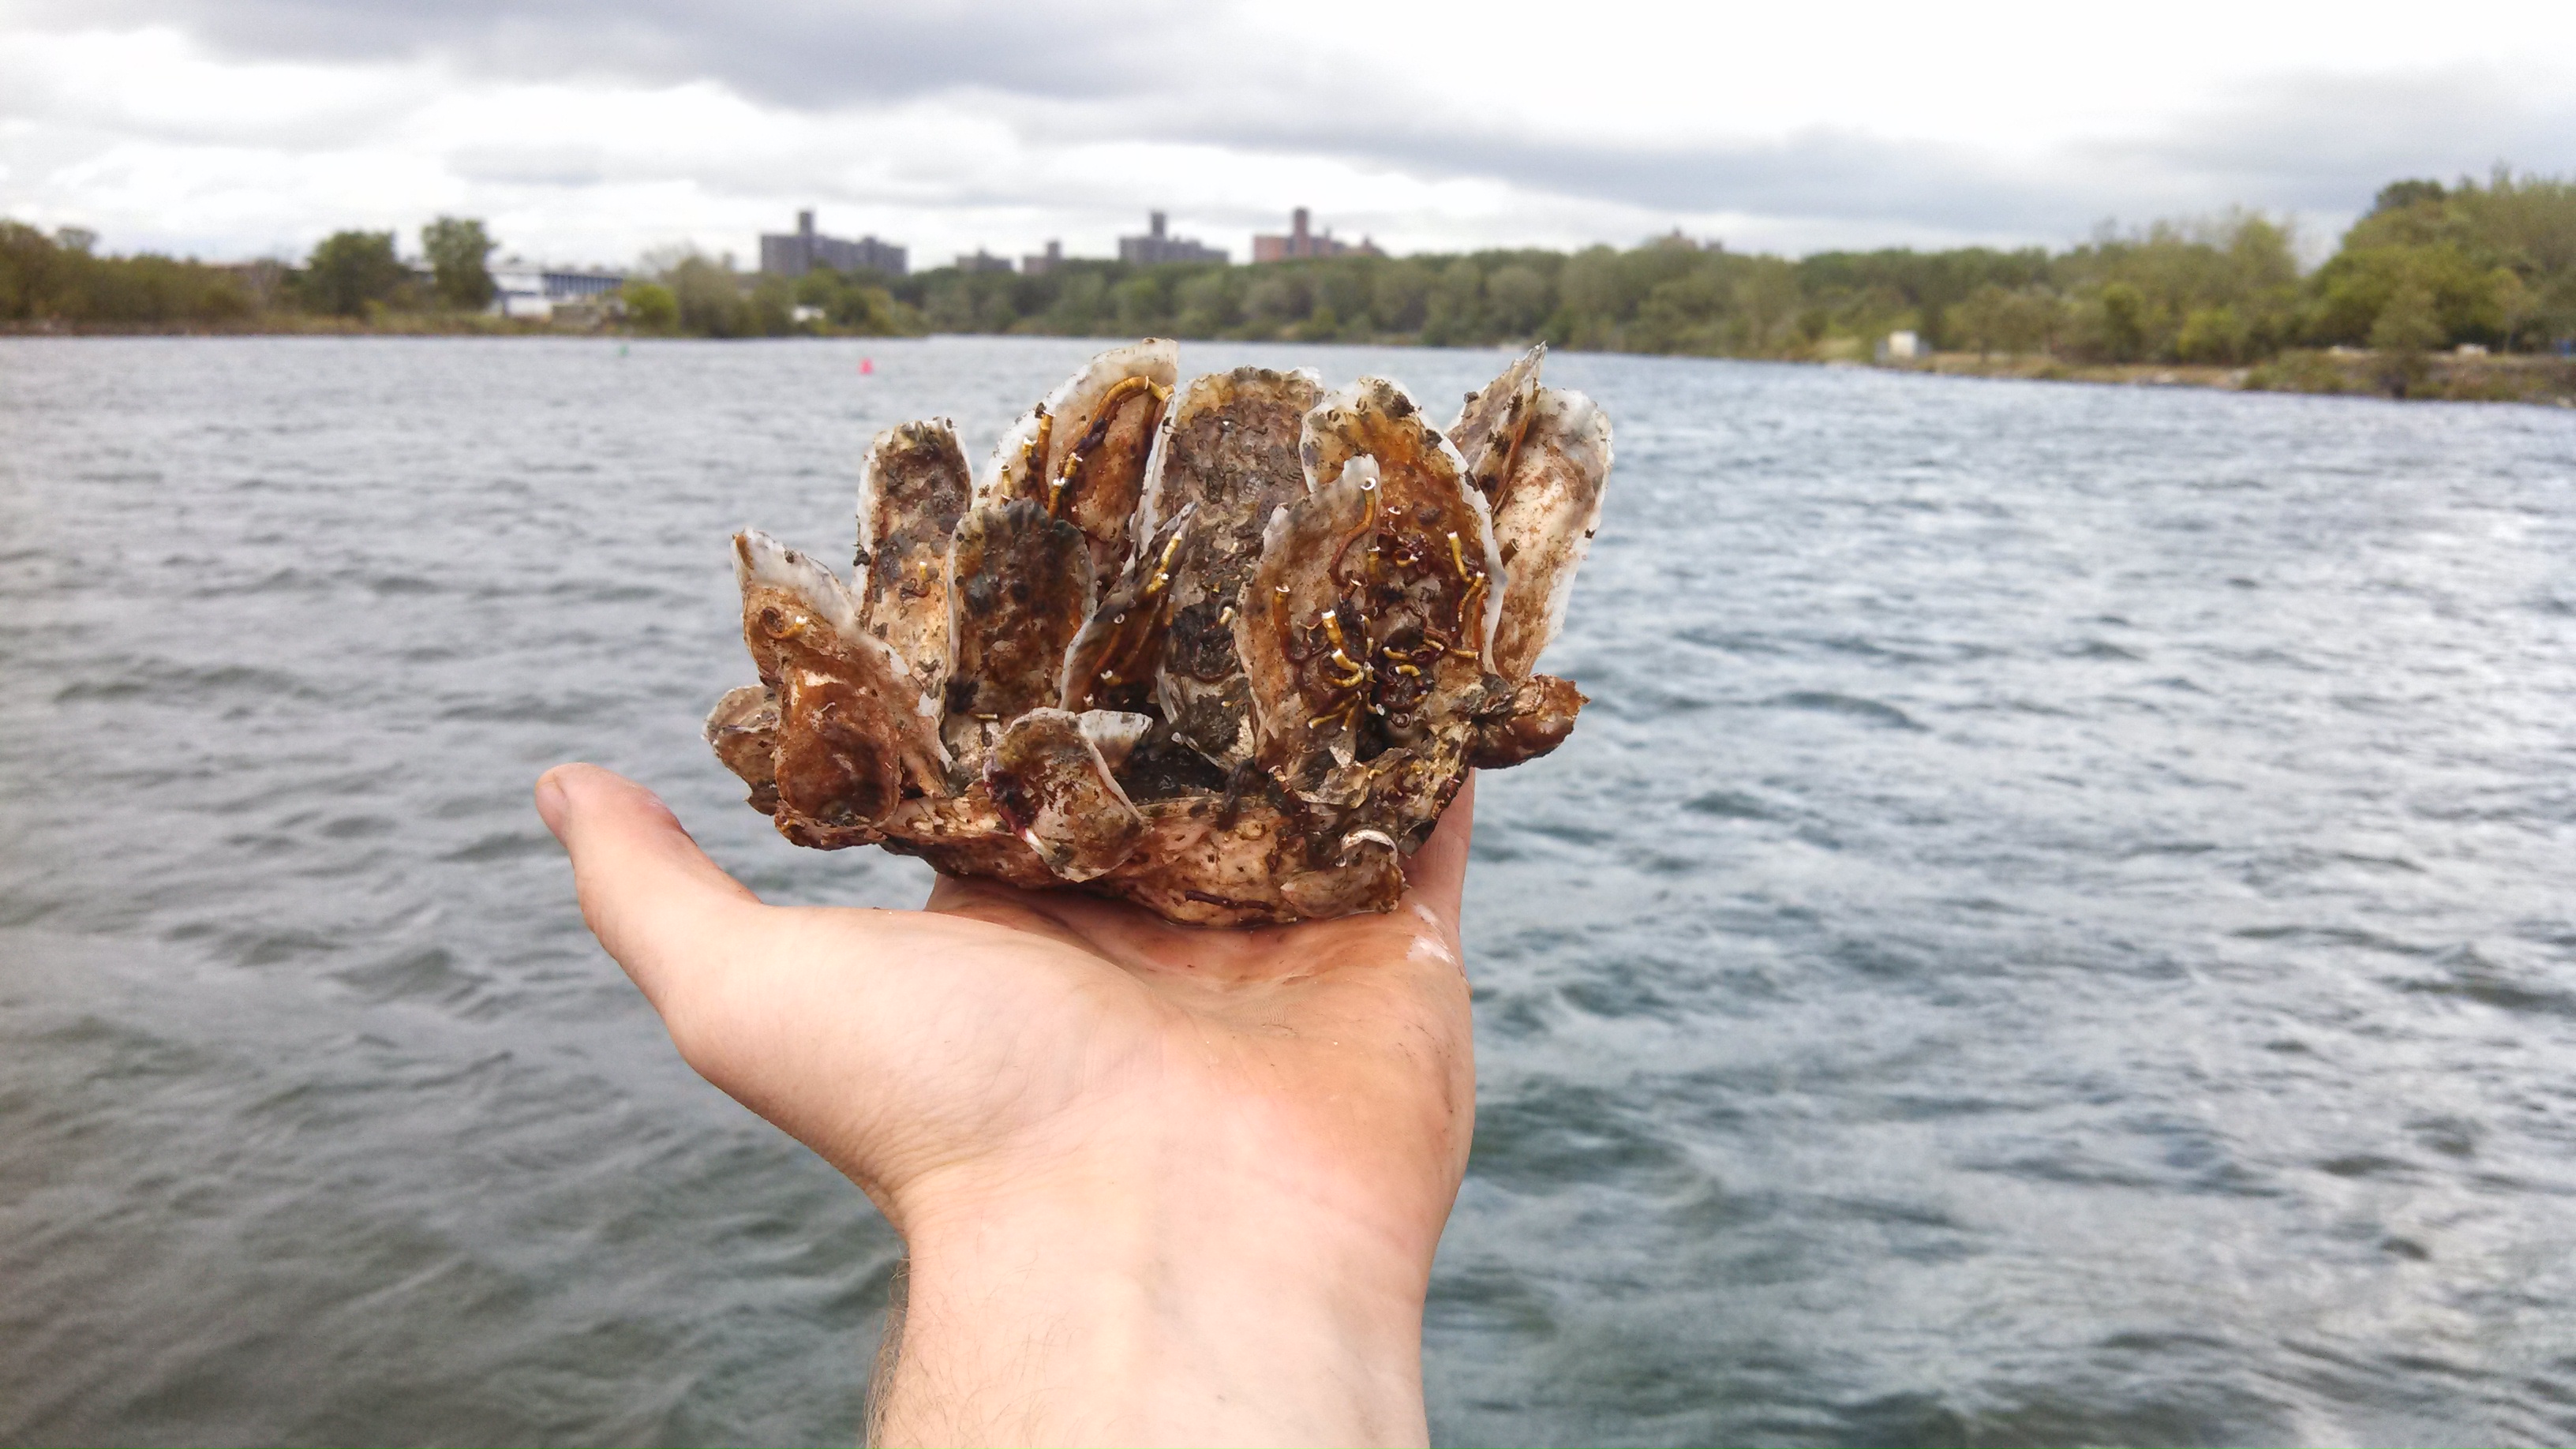 Eat Oysters At Top NYC Restaurants, Help The Ecosystem - Food Republic